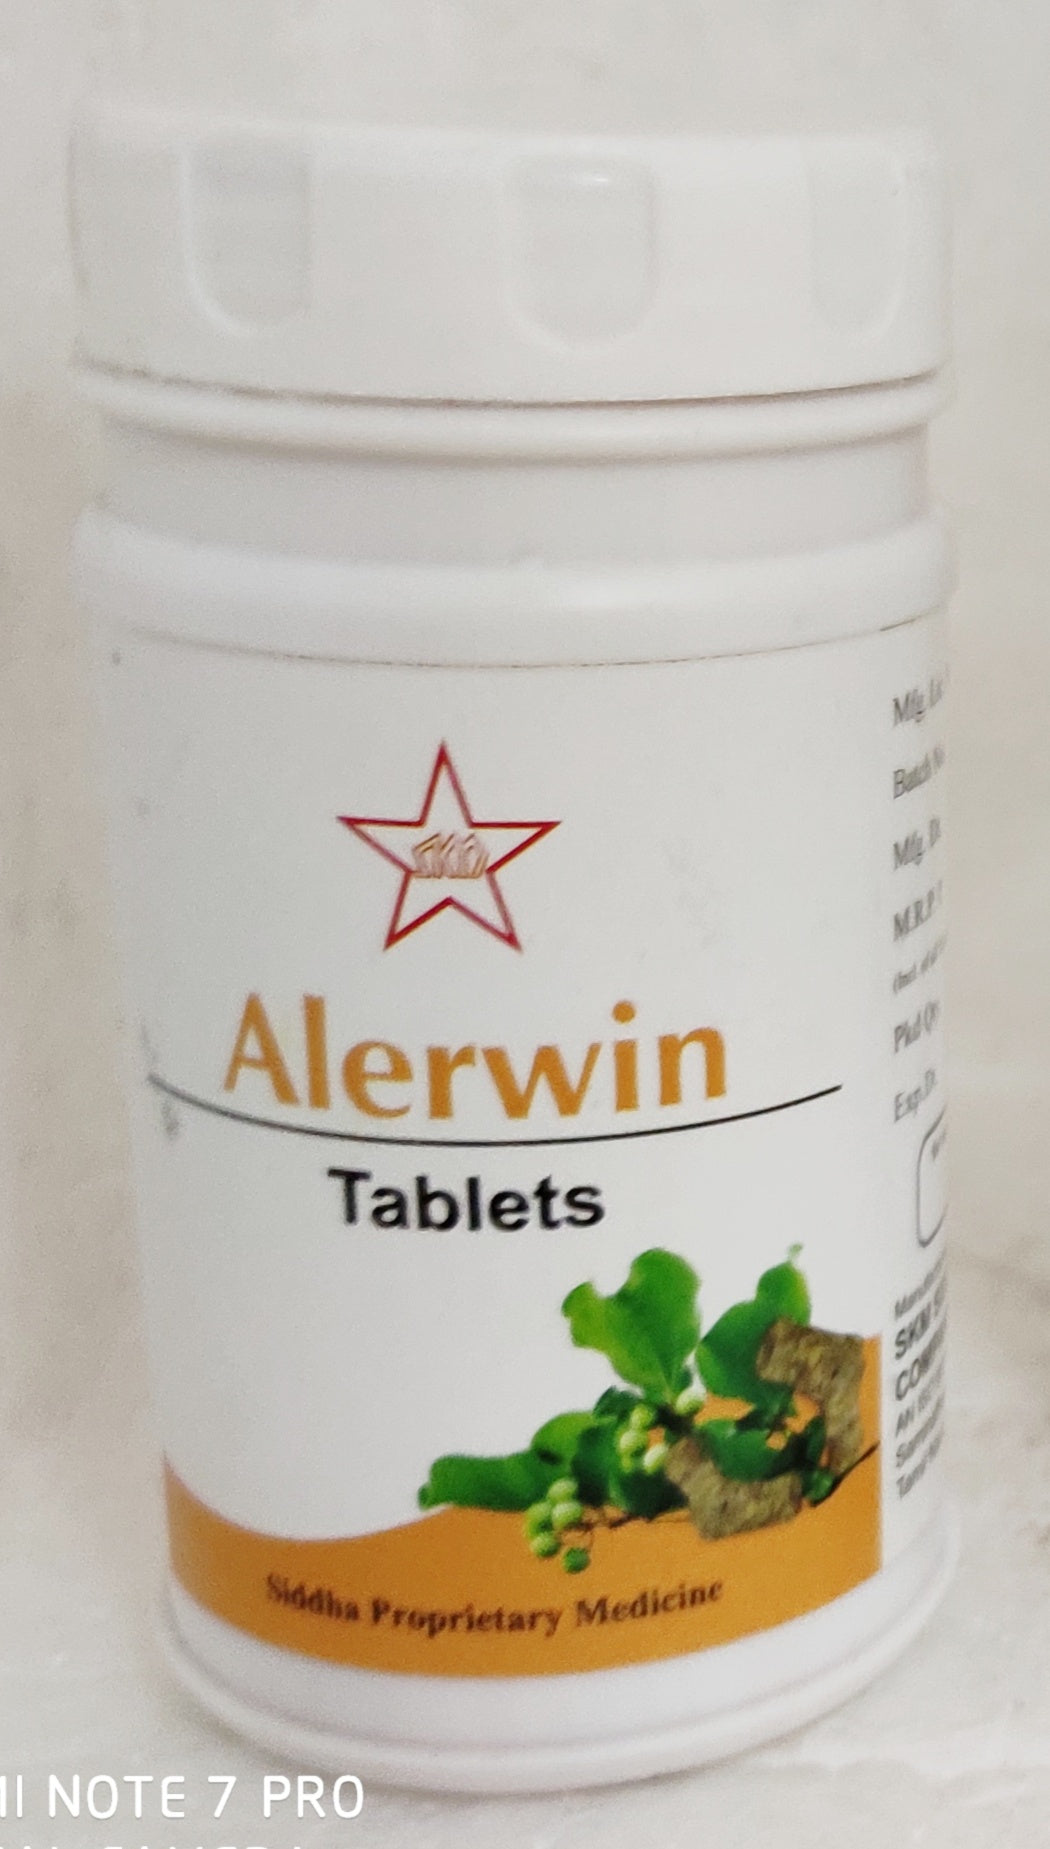 Shop SKM Alerwin 100Tablets at price 90.00 from SKM Online - Ayush Care